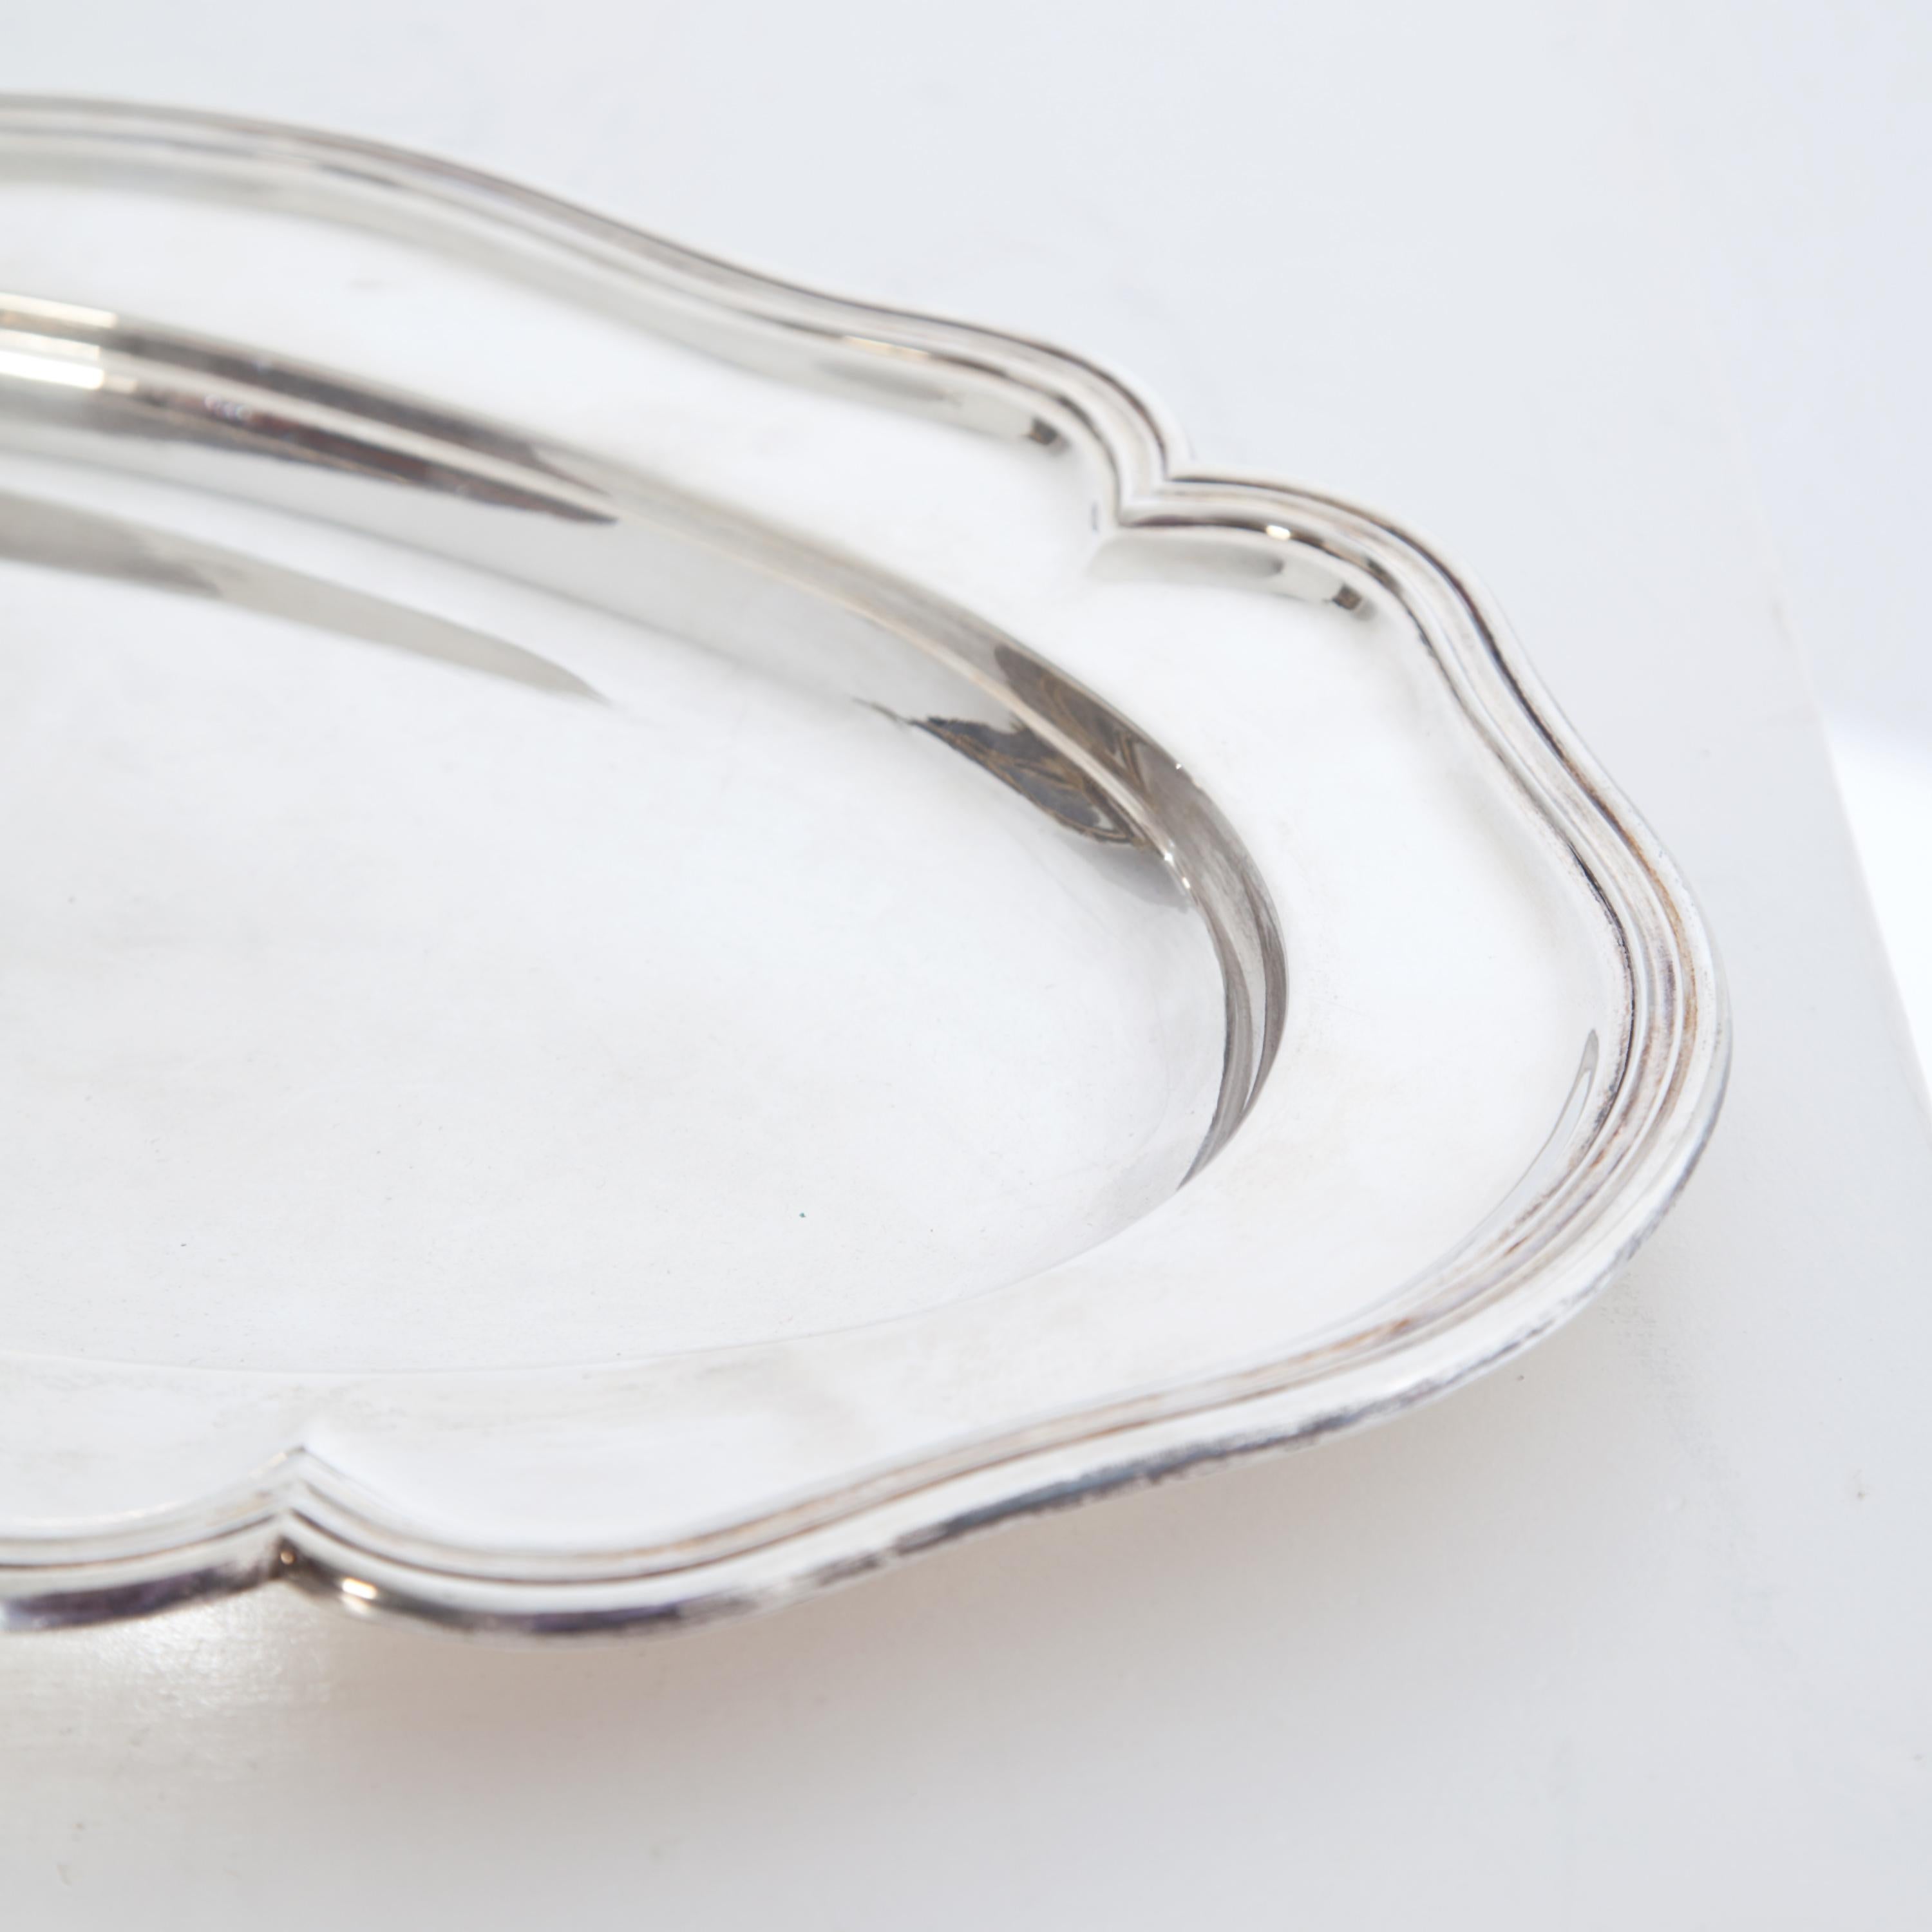 Serving plate stamped with the maker’s mark of F. Hiller in 900 silver. 1203g.